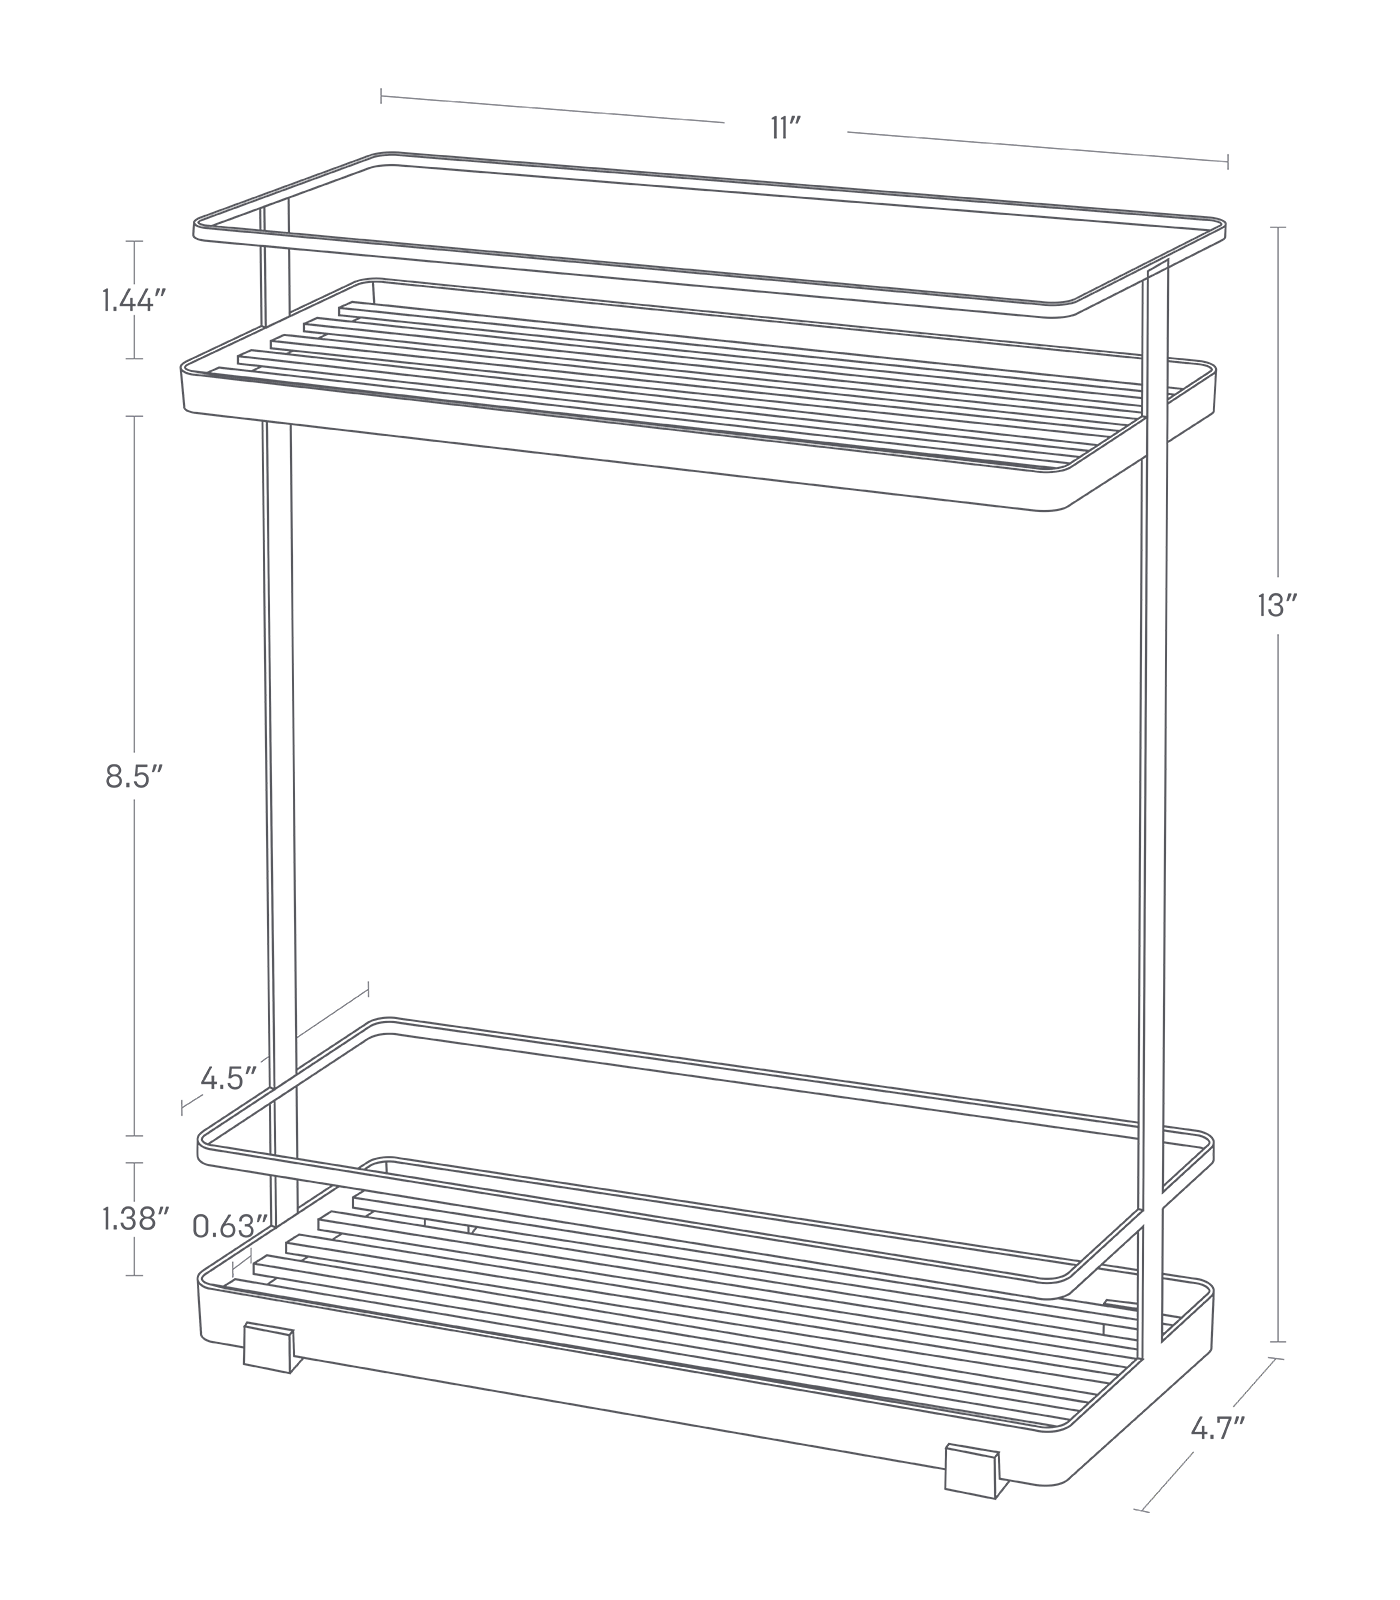 Dimension image for Shower Caddy showing total height of 13